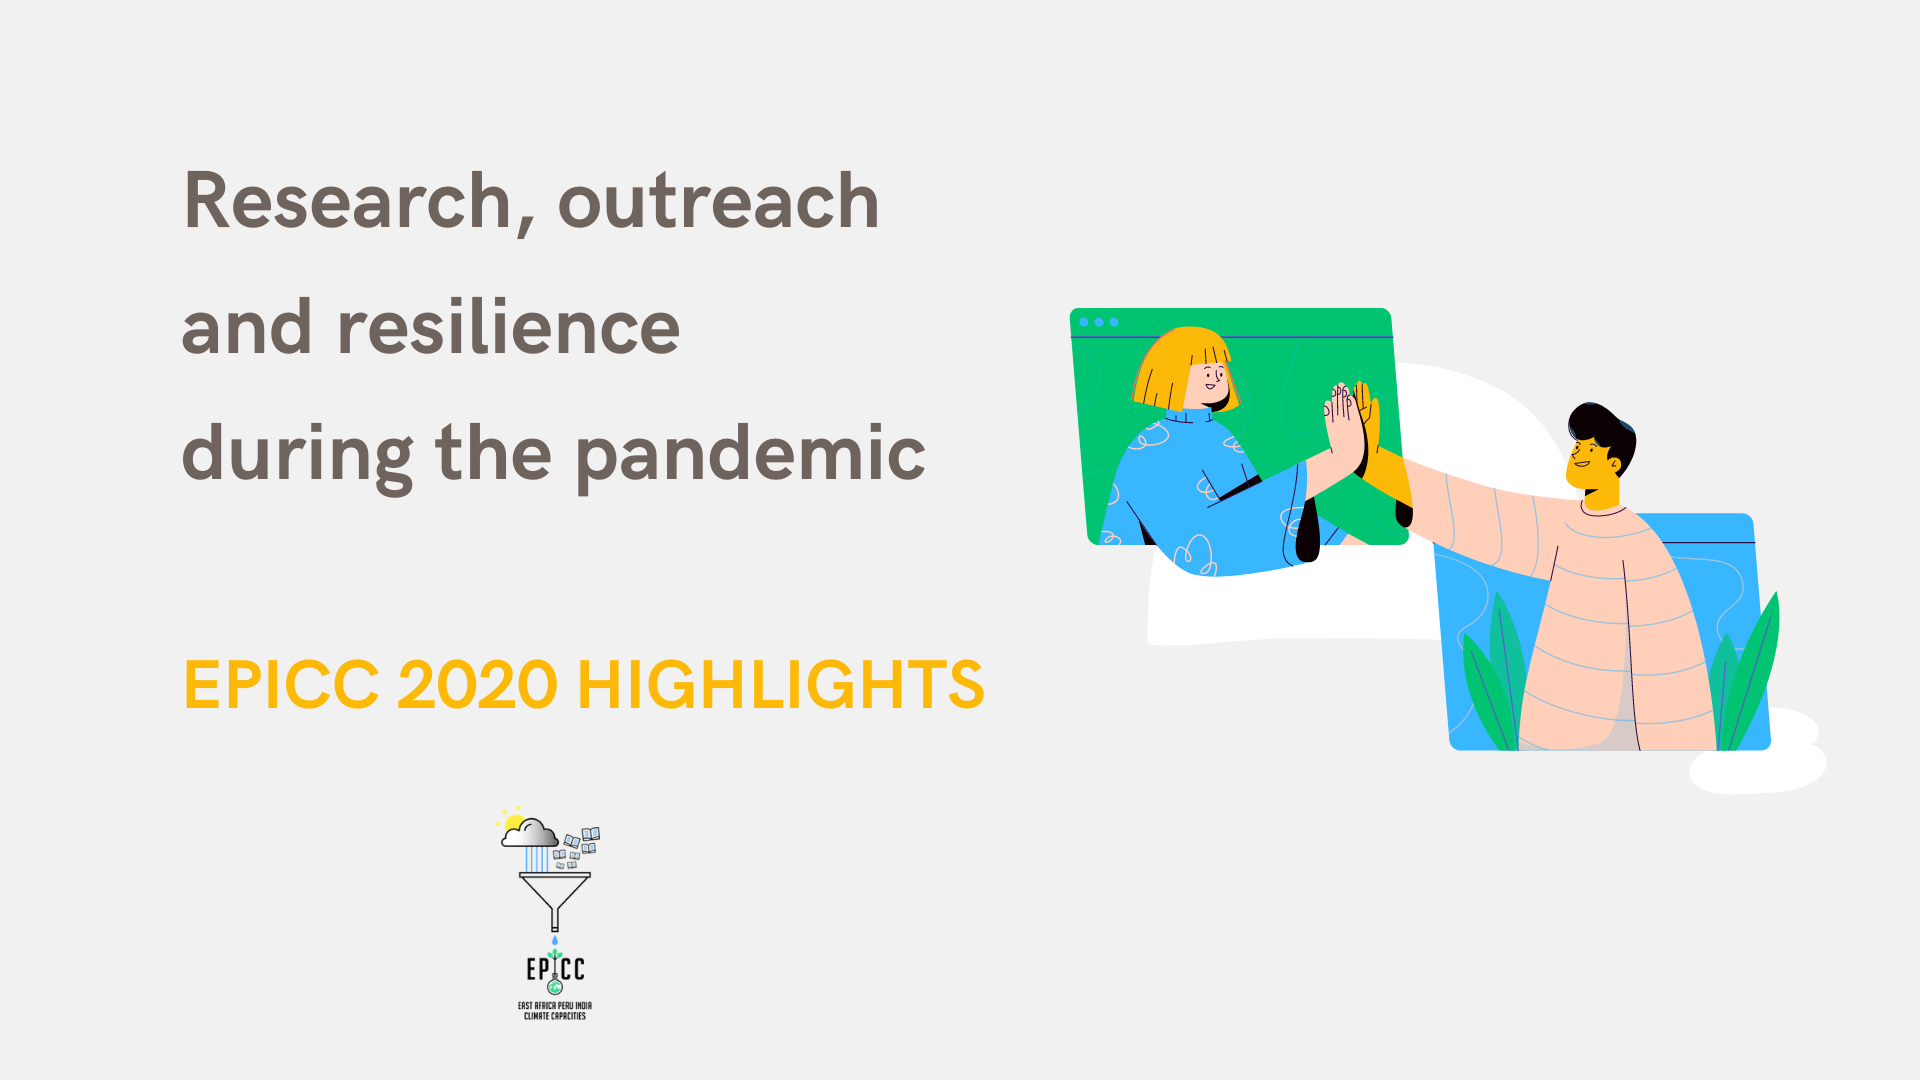 Research, outreach and resilience during the pandemic – EPICC 2020 highlights